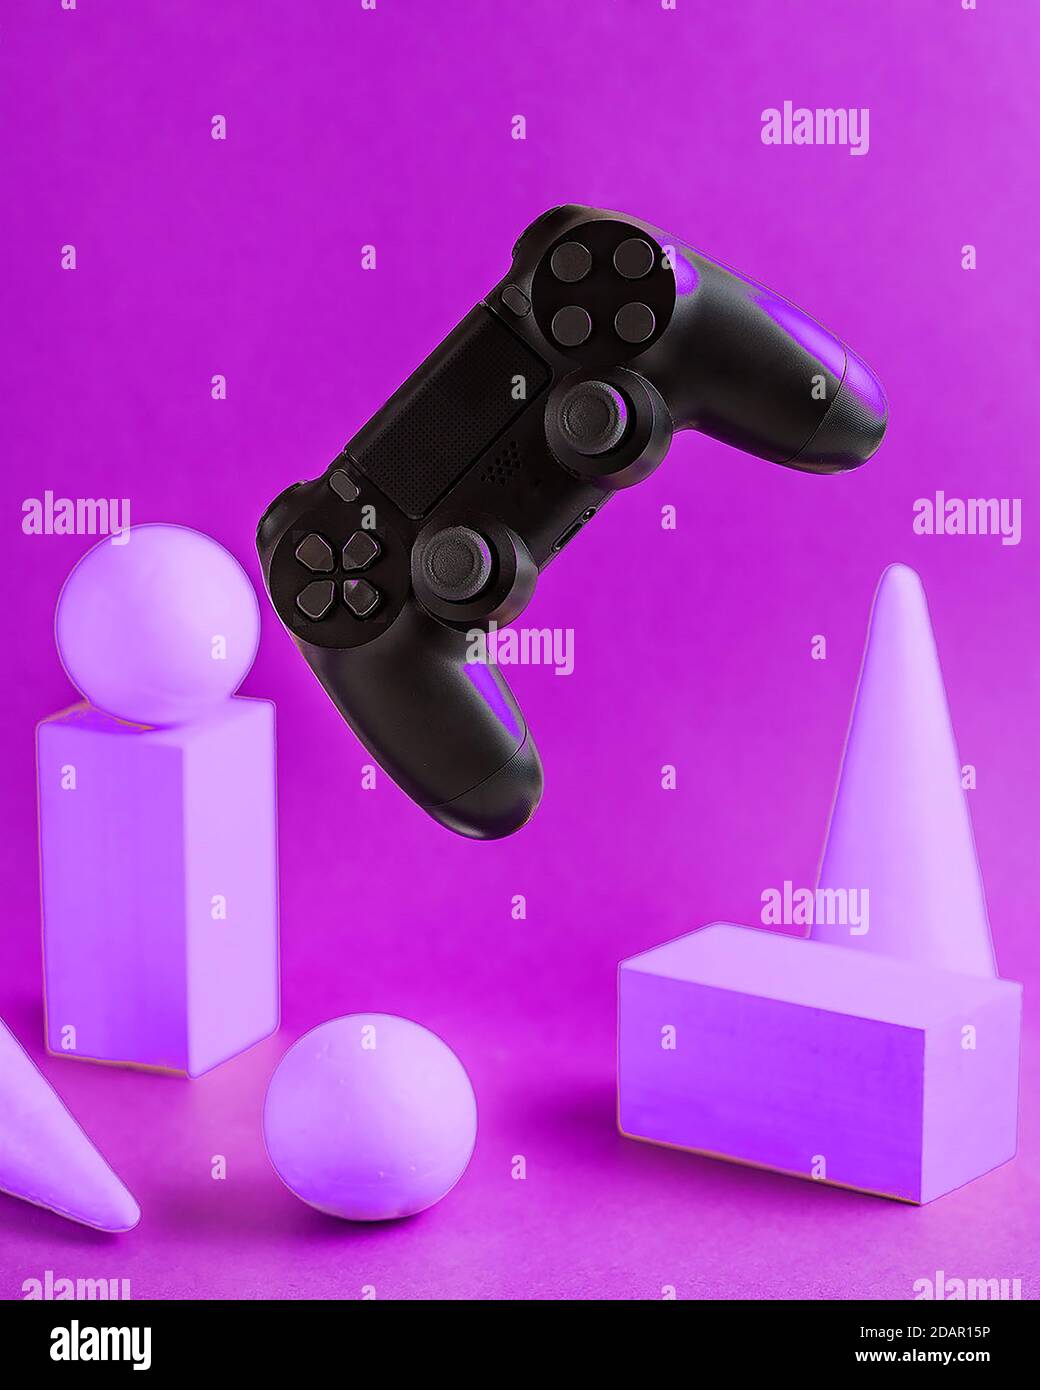 Black game joystick hanging in space, white three-dimensional geometric shapes on a purple background. computer games. Stock Photo